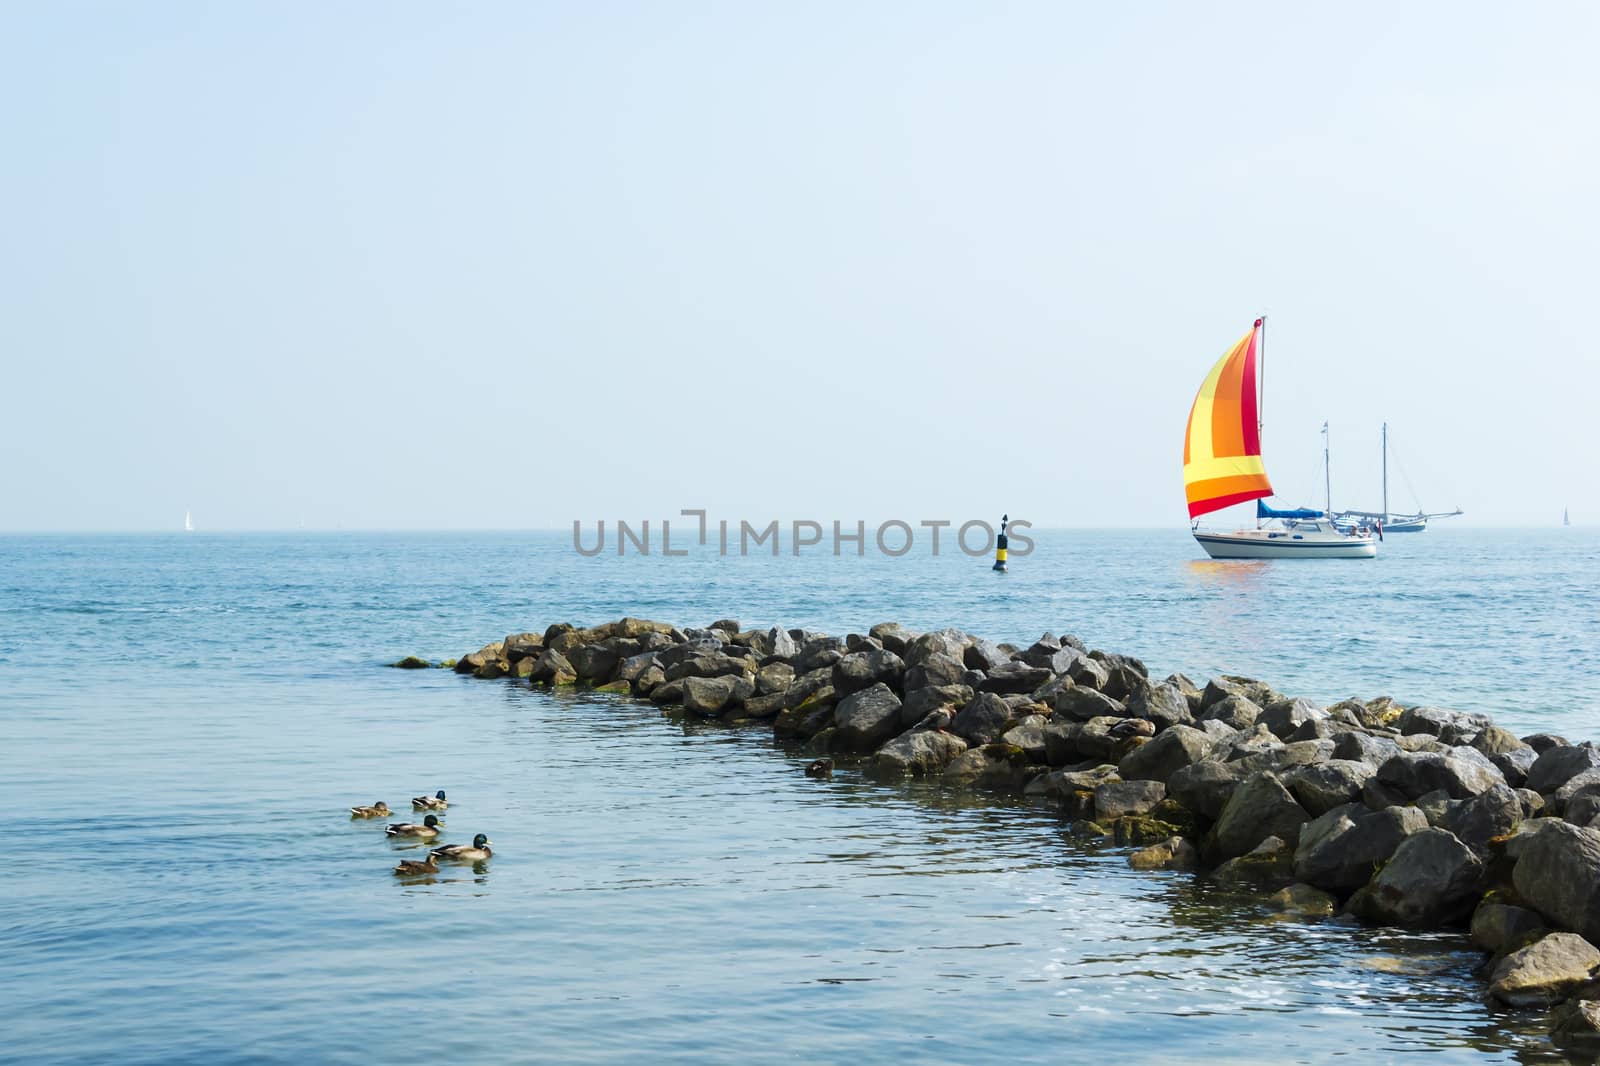 Seascape with sailboat the background of the blue sky.